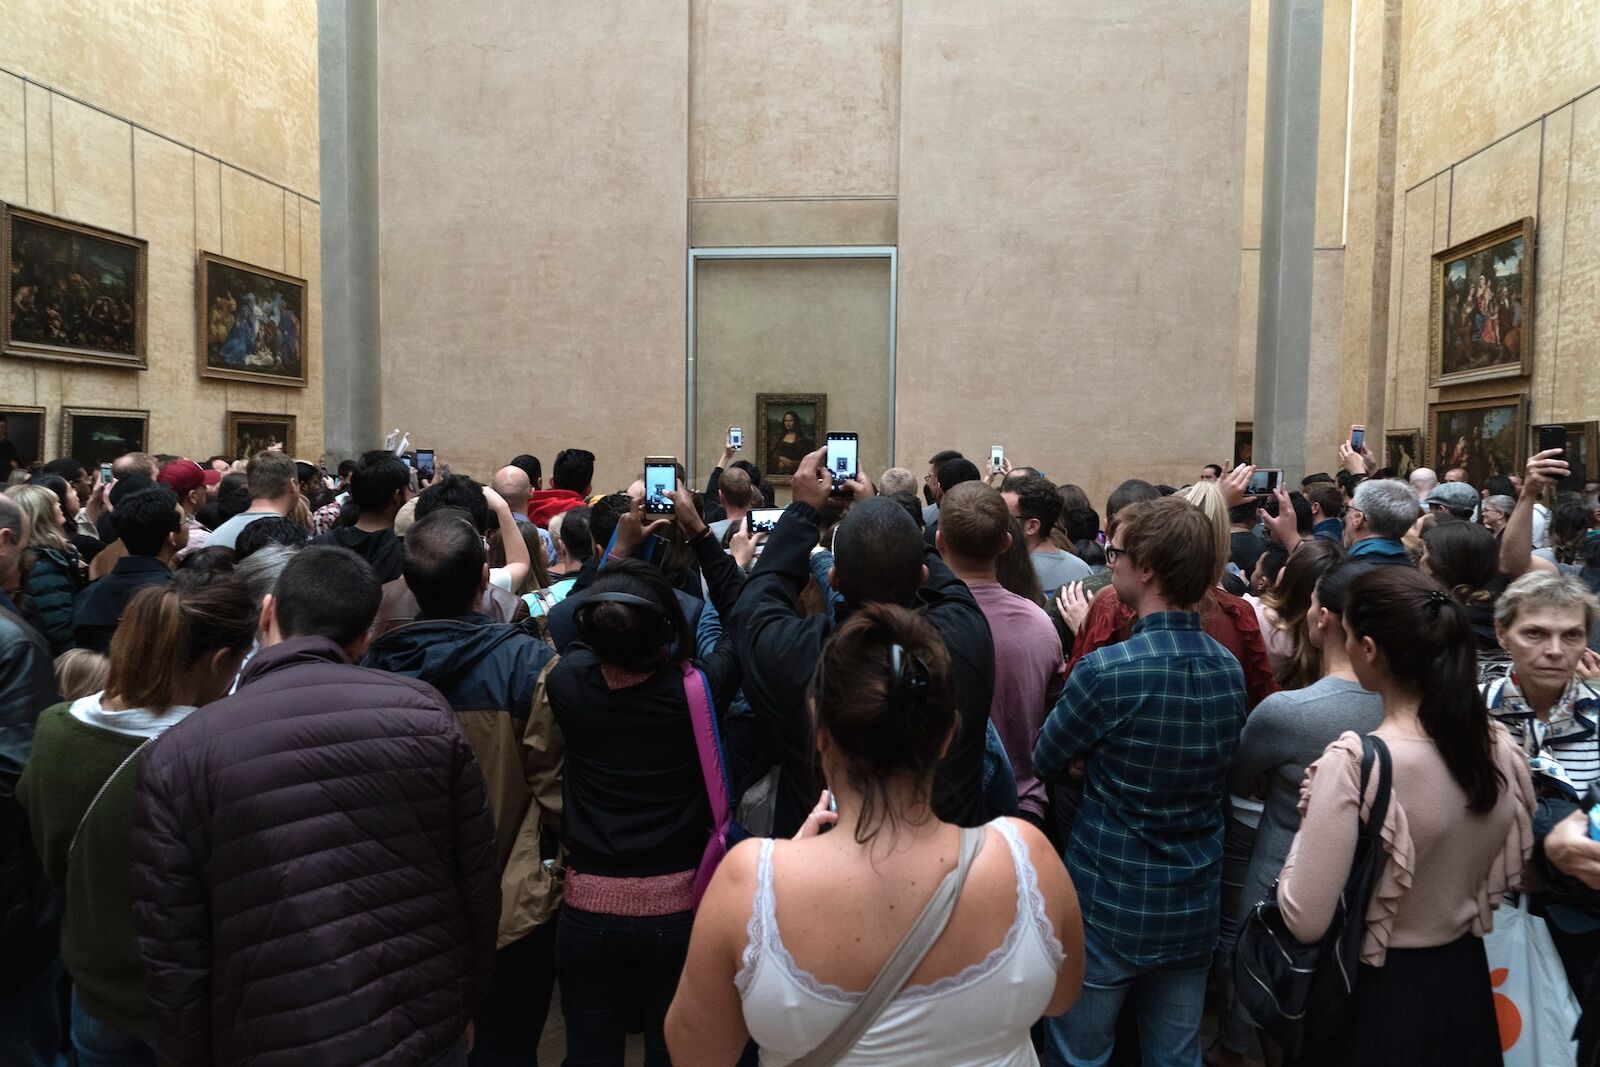 Trying to see the Mona Lisa in the Louvre